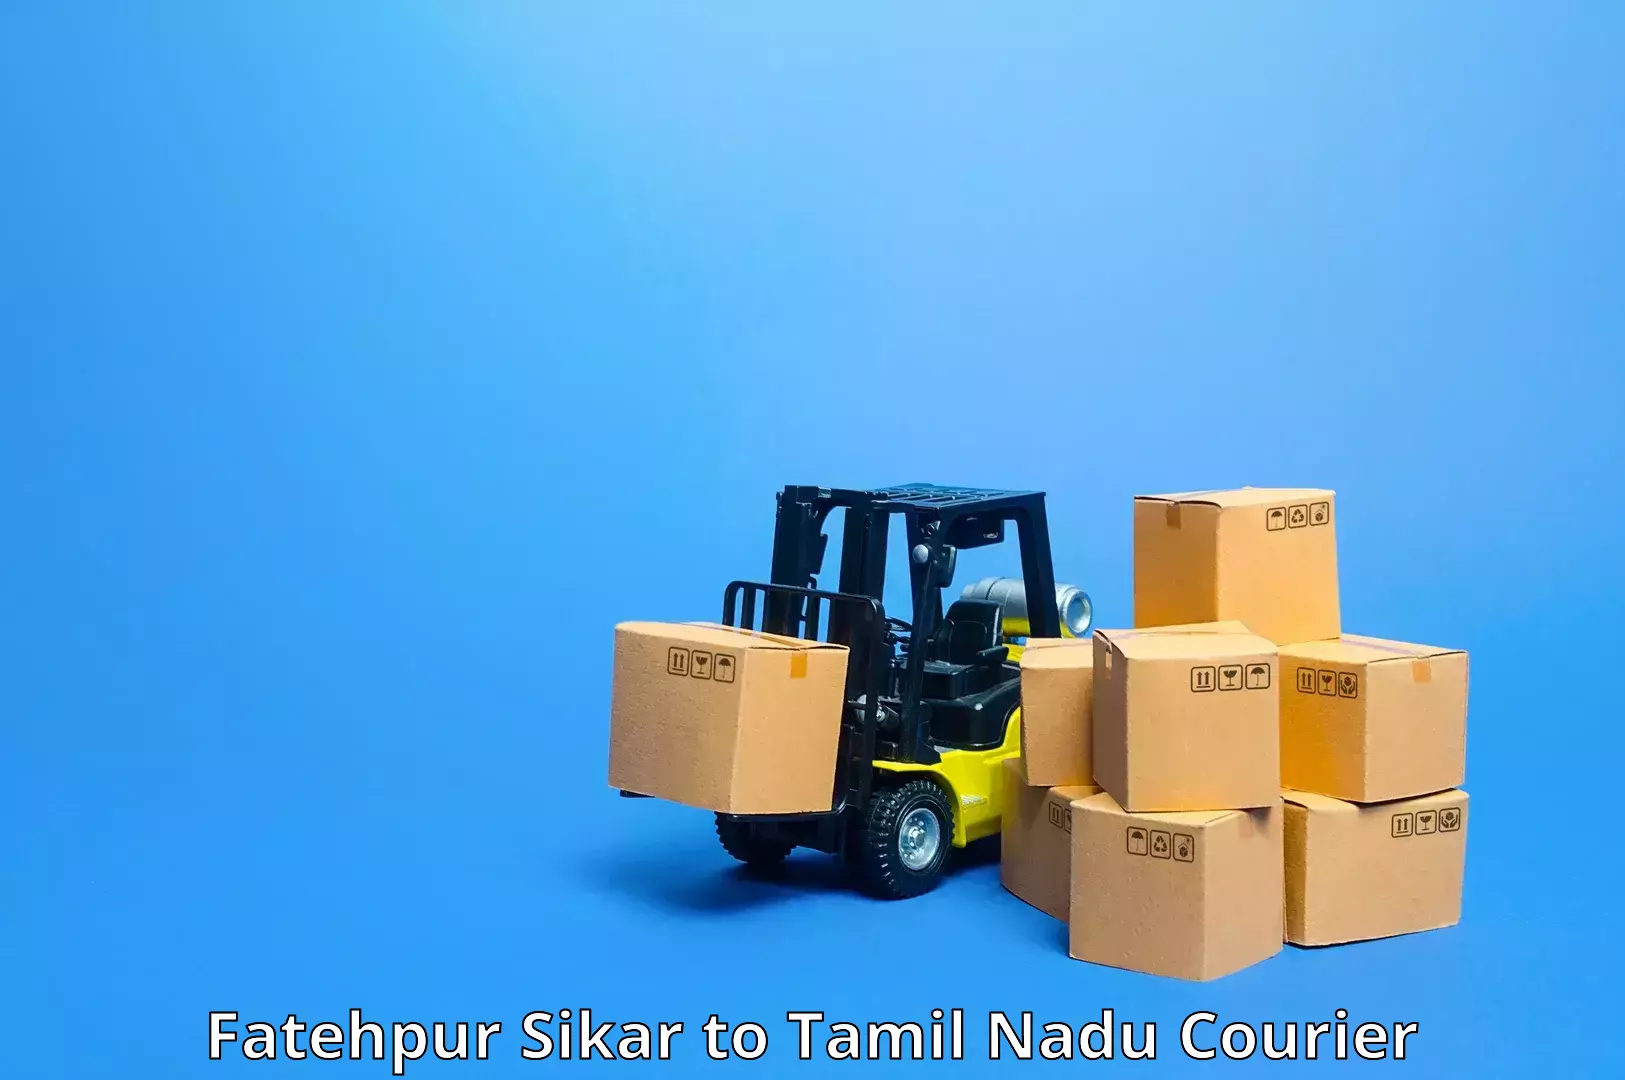 Affordable parcel service Fatehpur Sikar to Ayyampettai